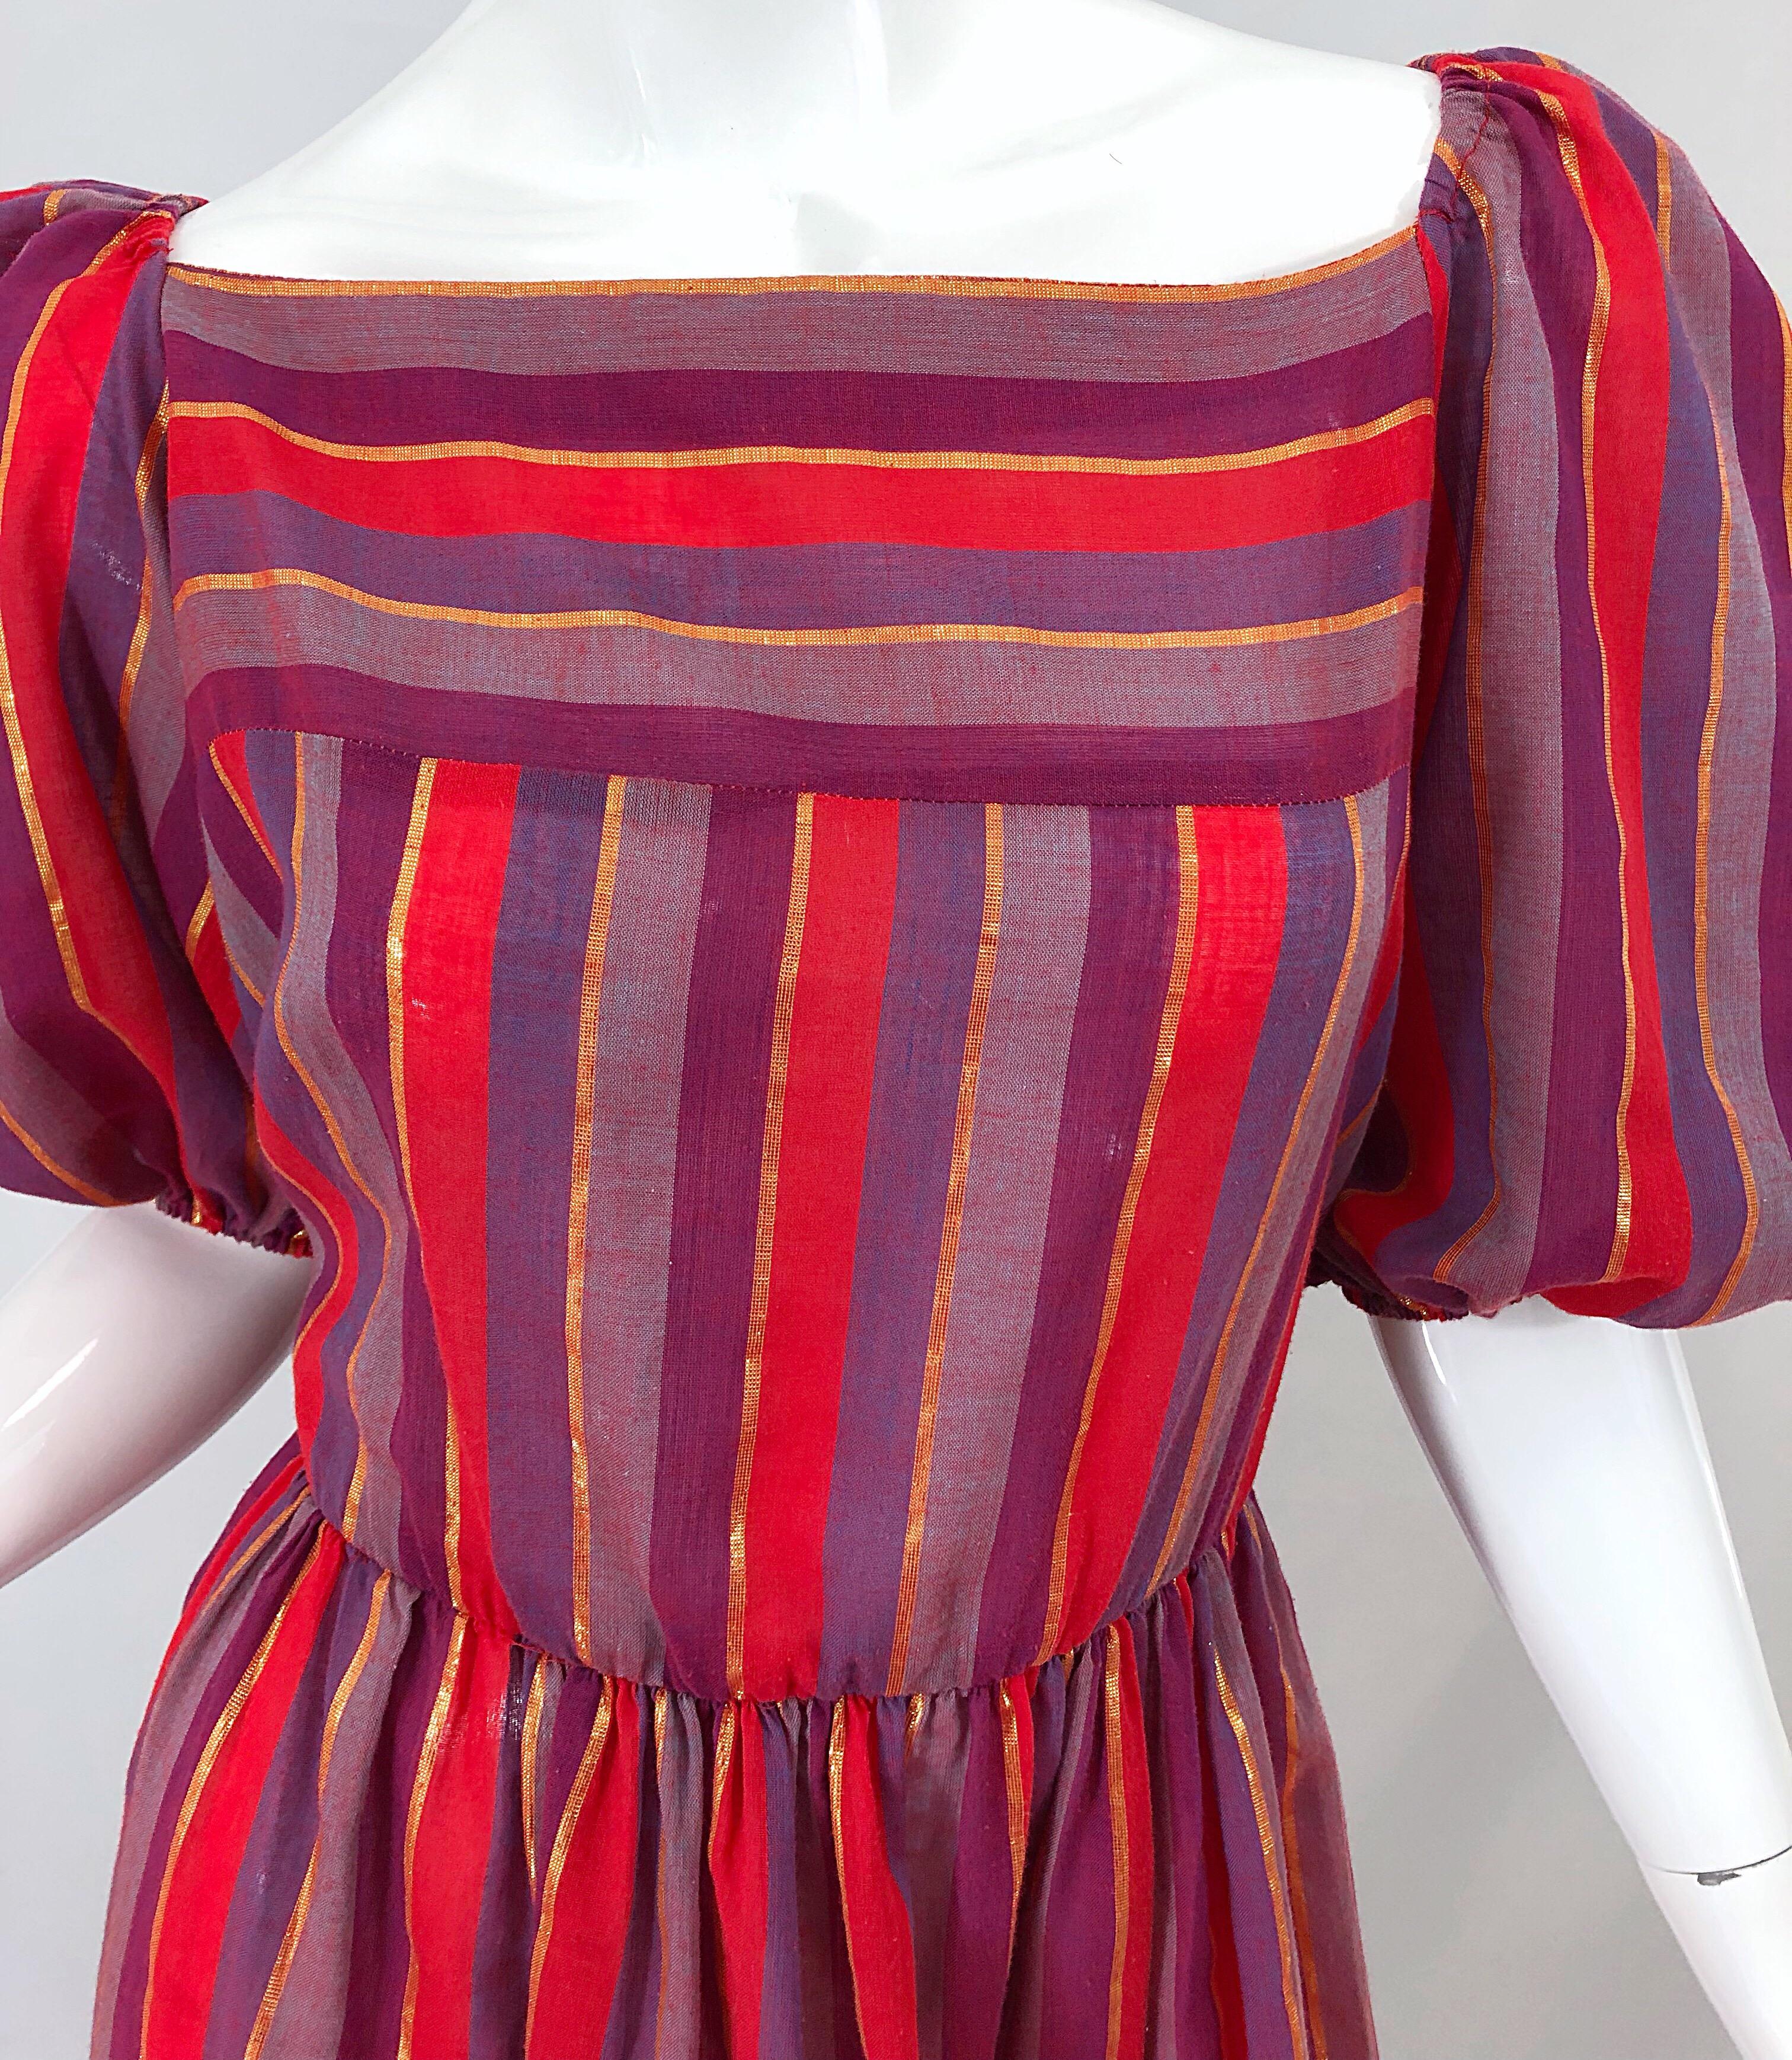 1970s Boho Chic Red + Purple + Gold Striped Cotton Voile 70s Vintage Dress In Excellent Condition For Sale In San Diego, CA